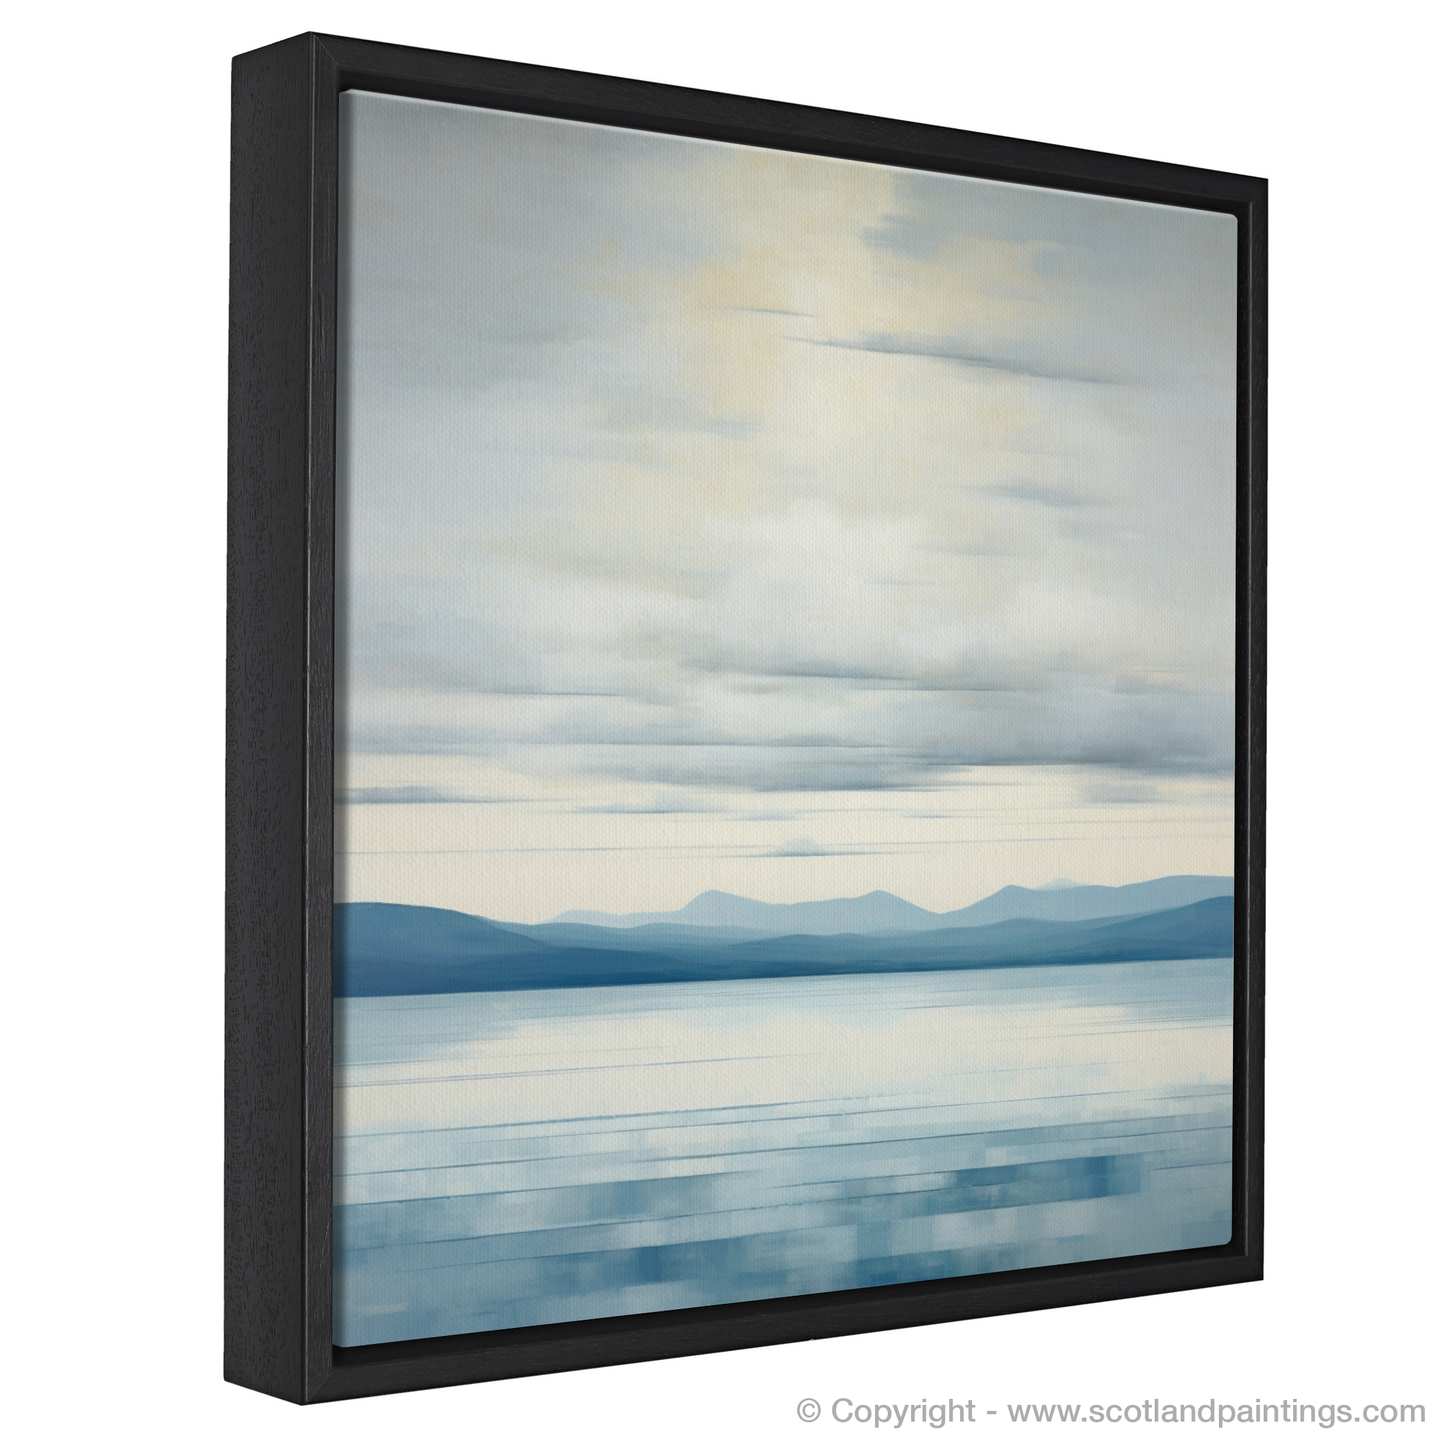 Painting and Art Print of A huge sky above Loch Lomond entitled "Tranquil Horizons of Loch Lomond".